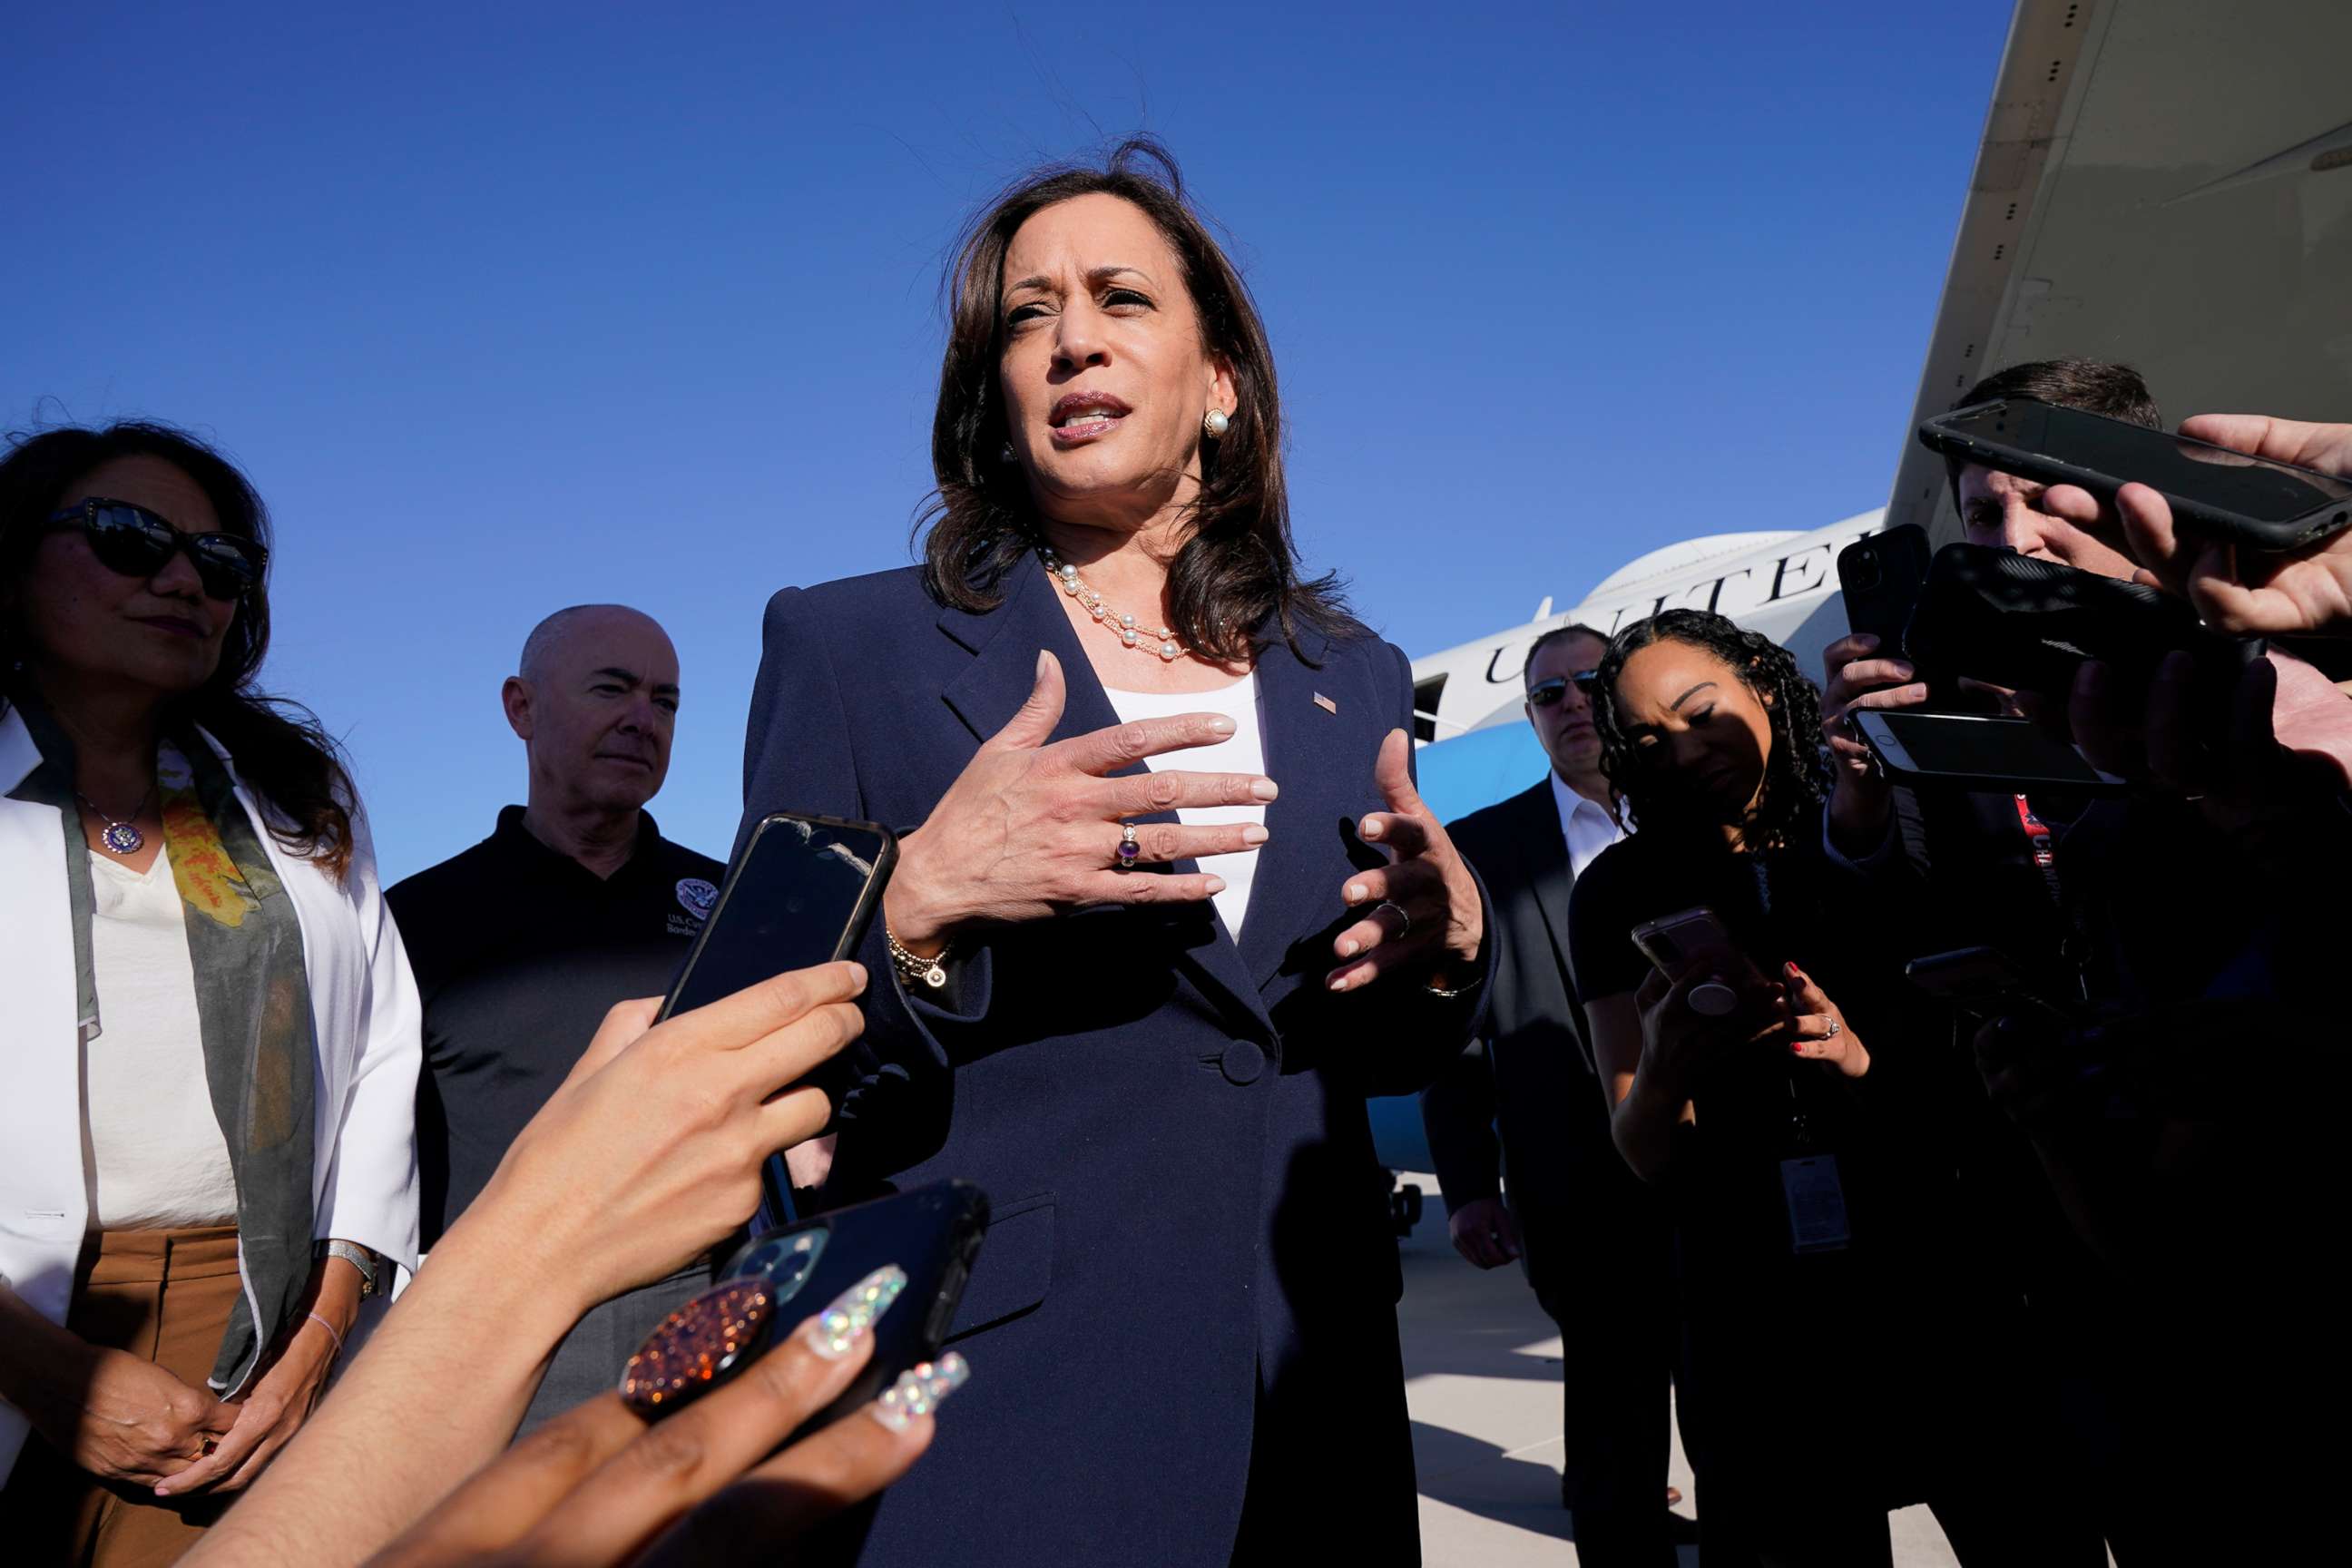 PHOTO: Vice President Kamala Harris talks to the media after stepping off Air Force Two, June 25, 2021, on arrival to El Paso, Texas.